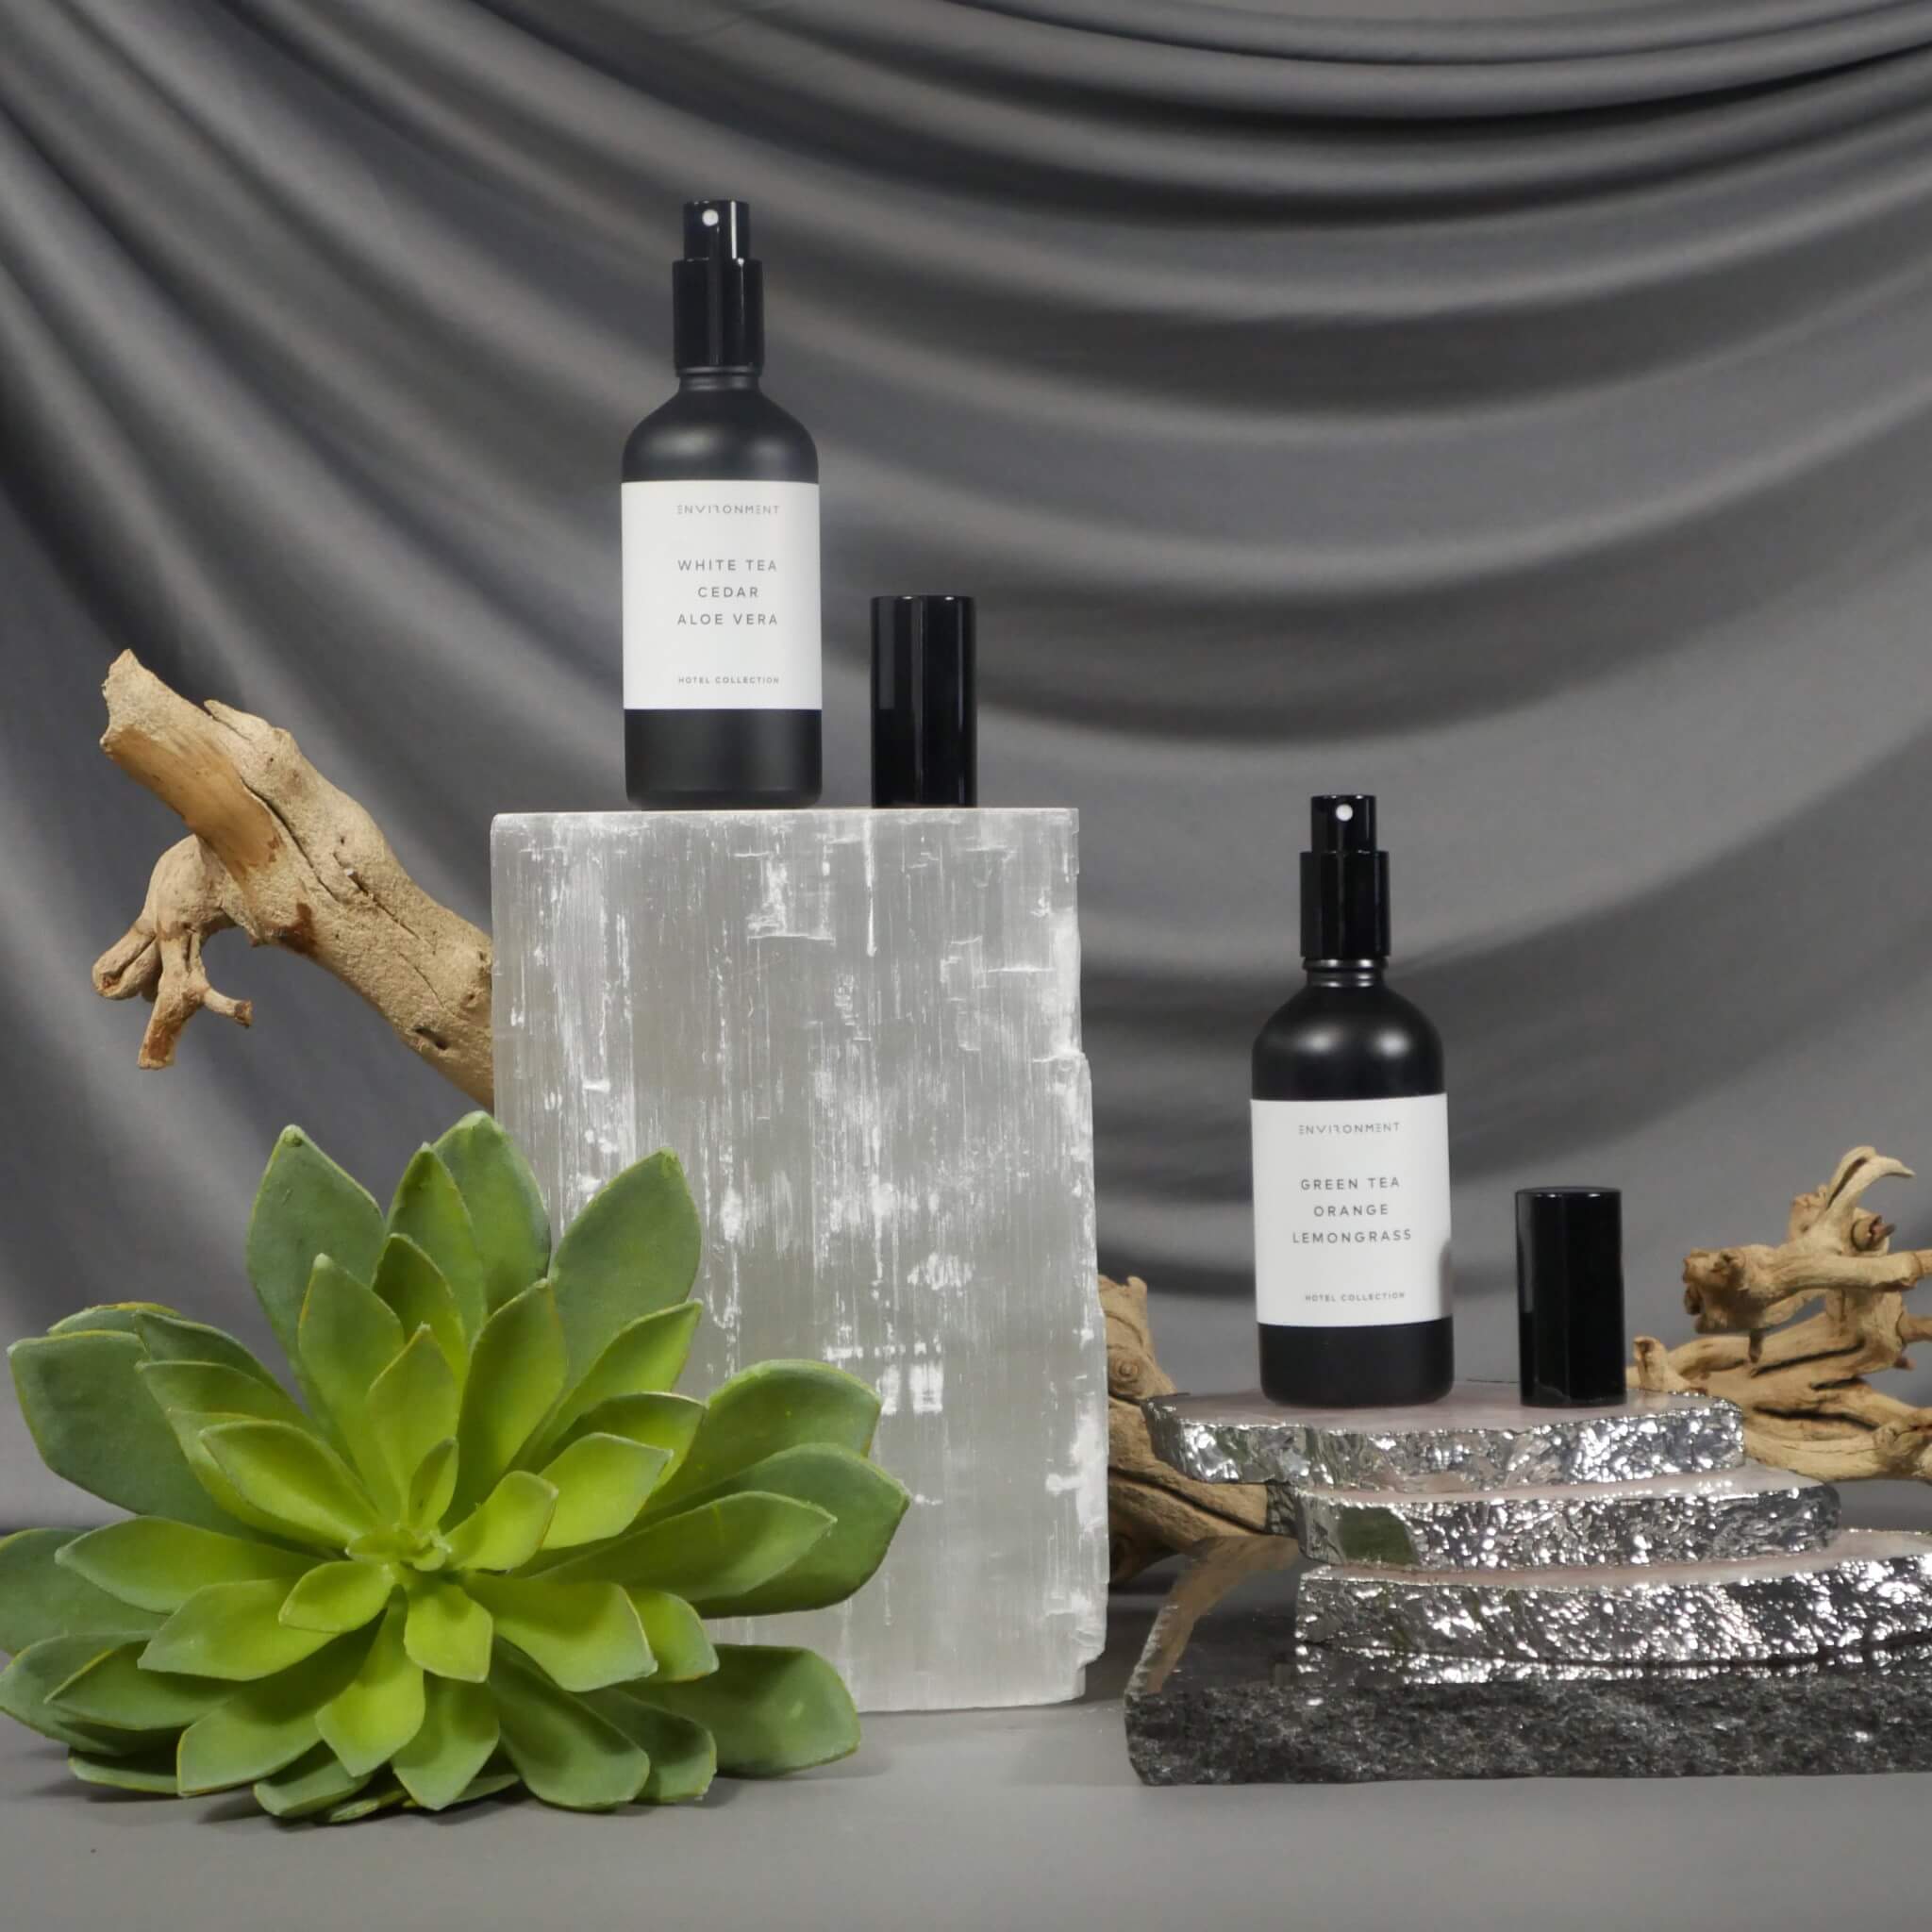 Damask Rose | Vetiver | Guaiac Wood Room Spray (Inspired by Le Labo Rose 31® and Fairmont Hotel®)